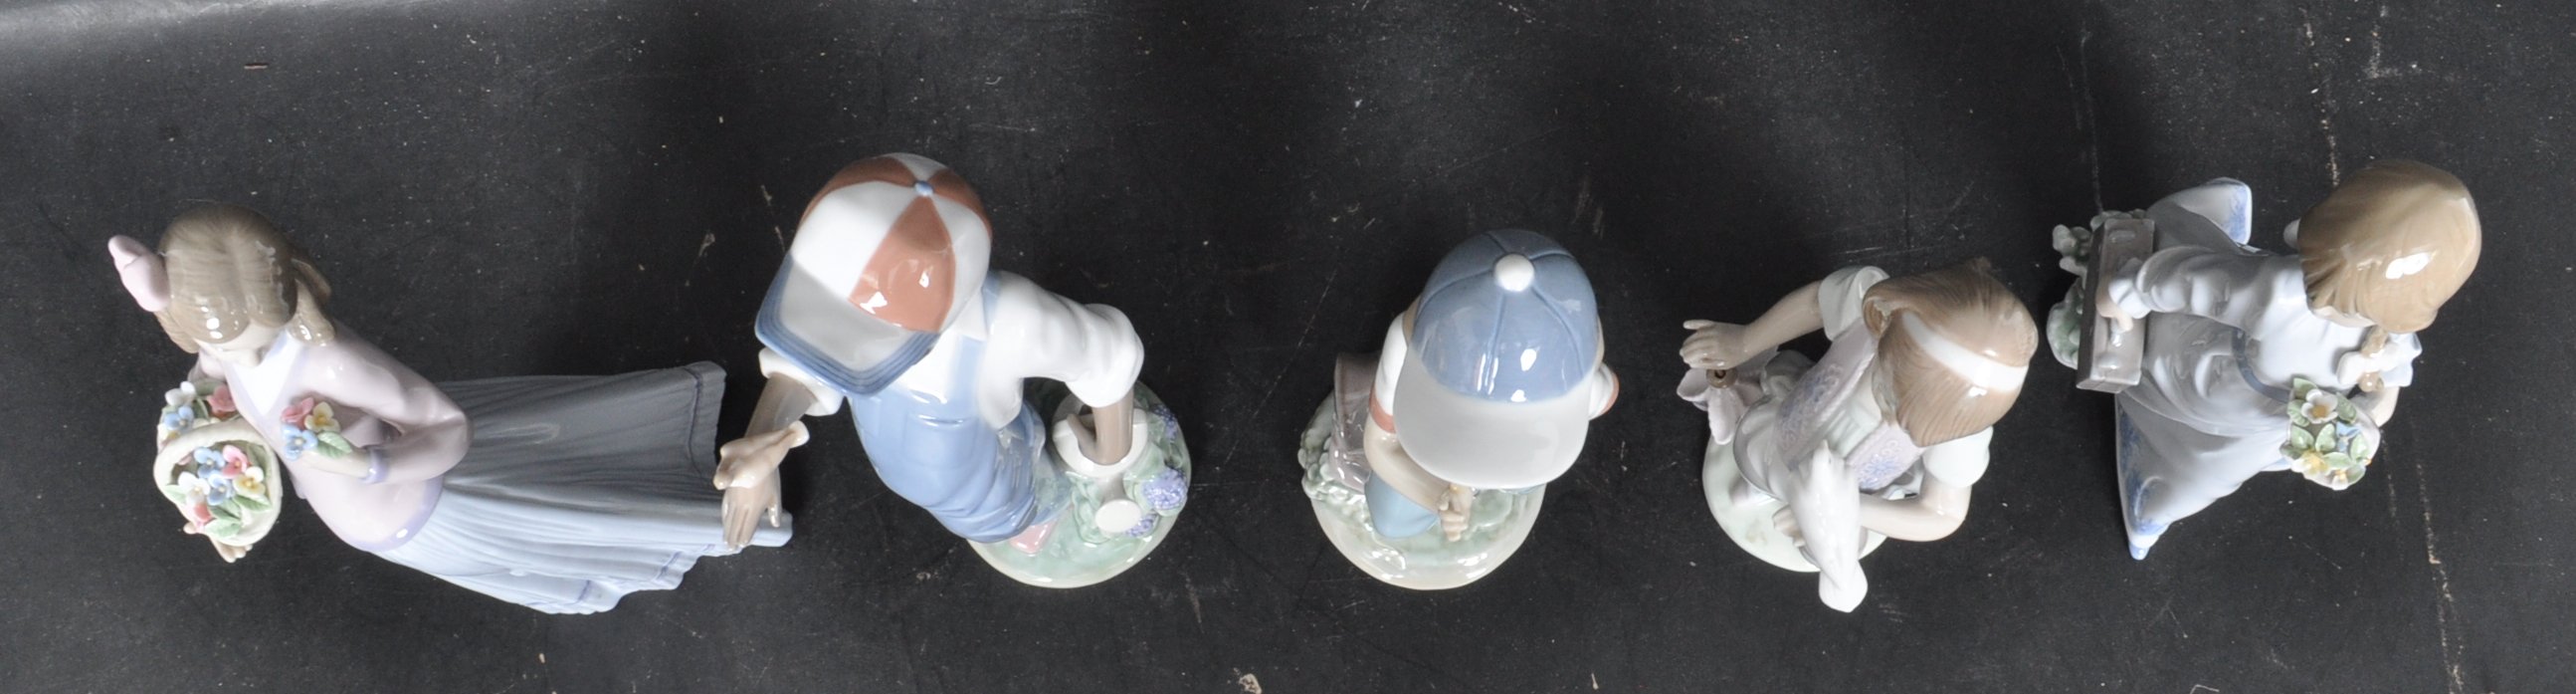 COLLECTION OF FIVE SPANISH LLADRO CERAMIC PORCELAIN FIGURINES - Image 5 of 6